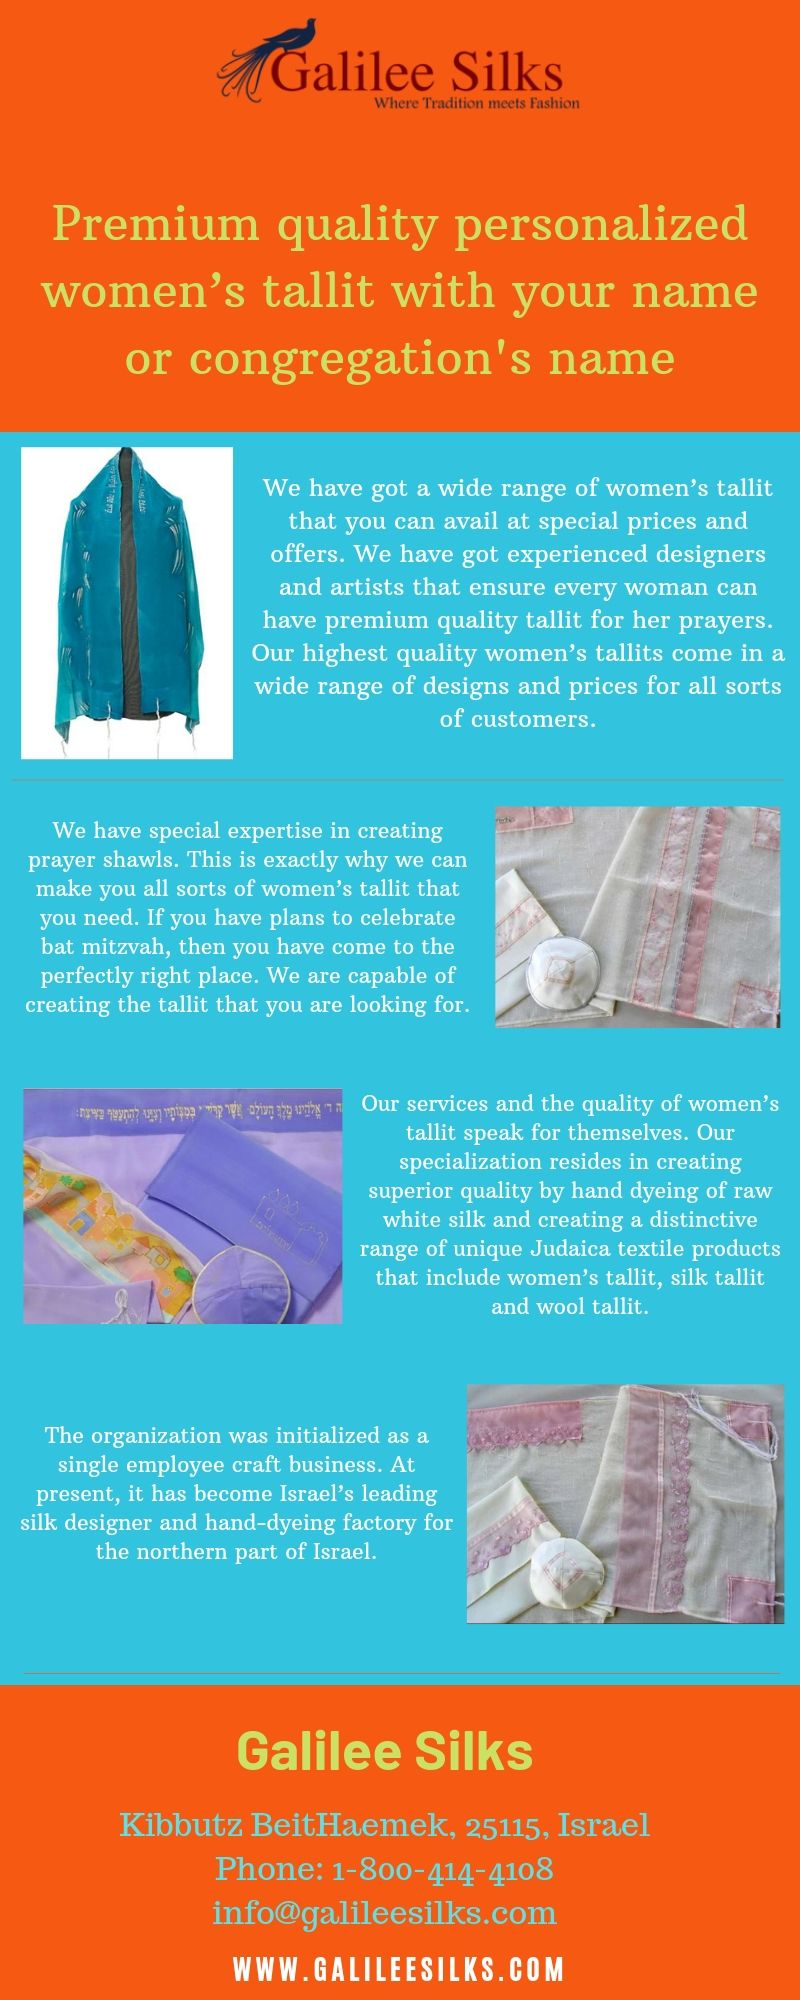 Premium quality personalized women’s tallit with your name or congregation's name It cannot be denied that the women’s tallit is one of the most important Jewish religious symbols that are used during prayers.For more details, visit this link: https://bit.ly/2LIsJJ5
 by amramrafi